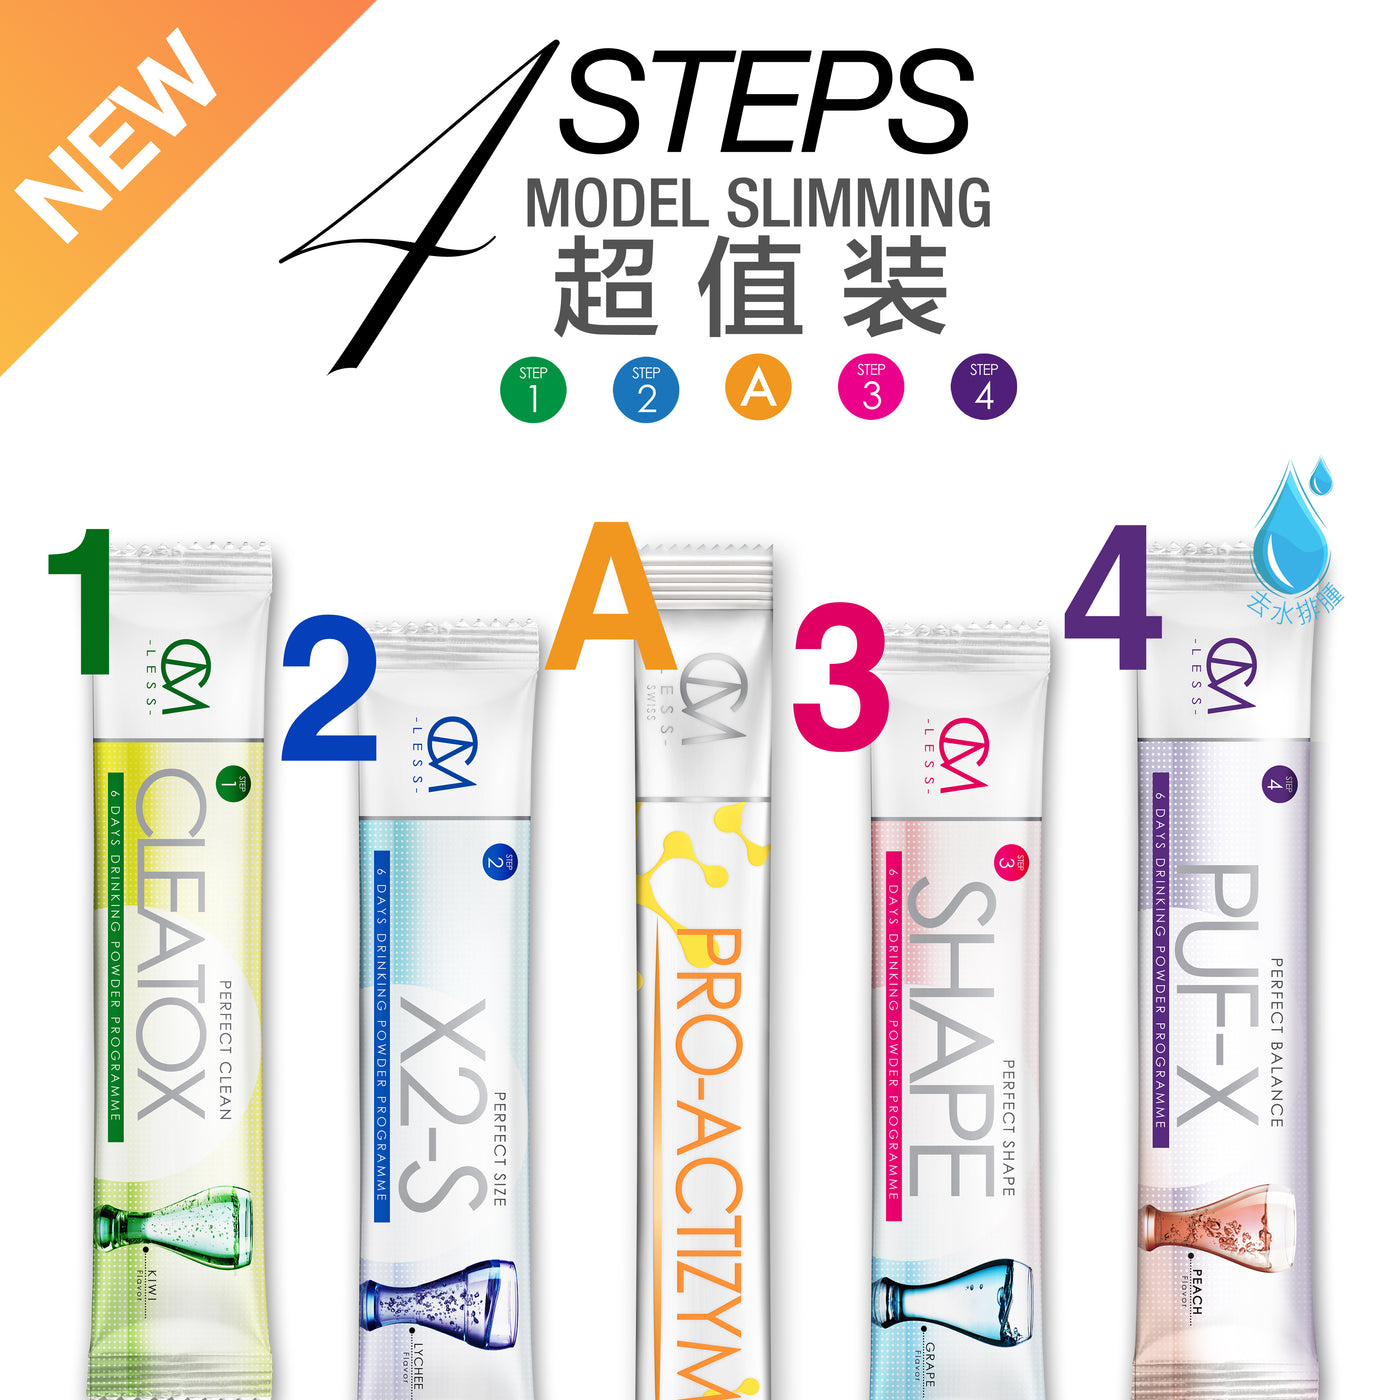 Step 1234 + Pro-Actizyme